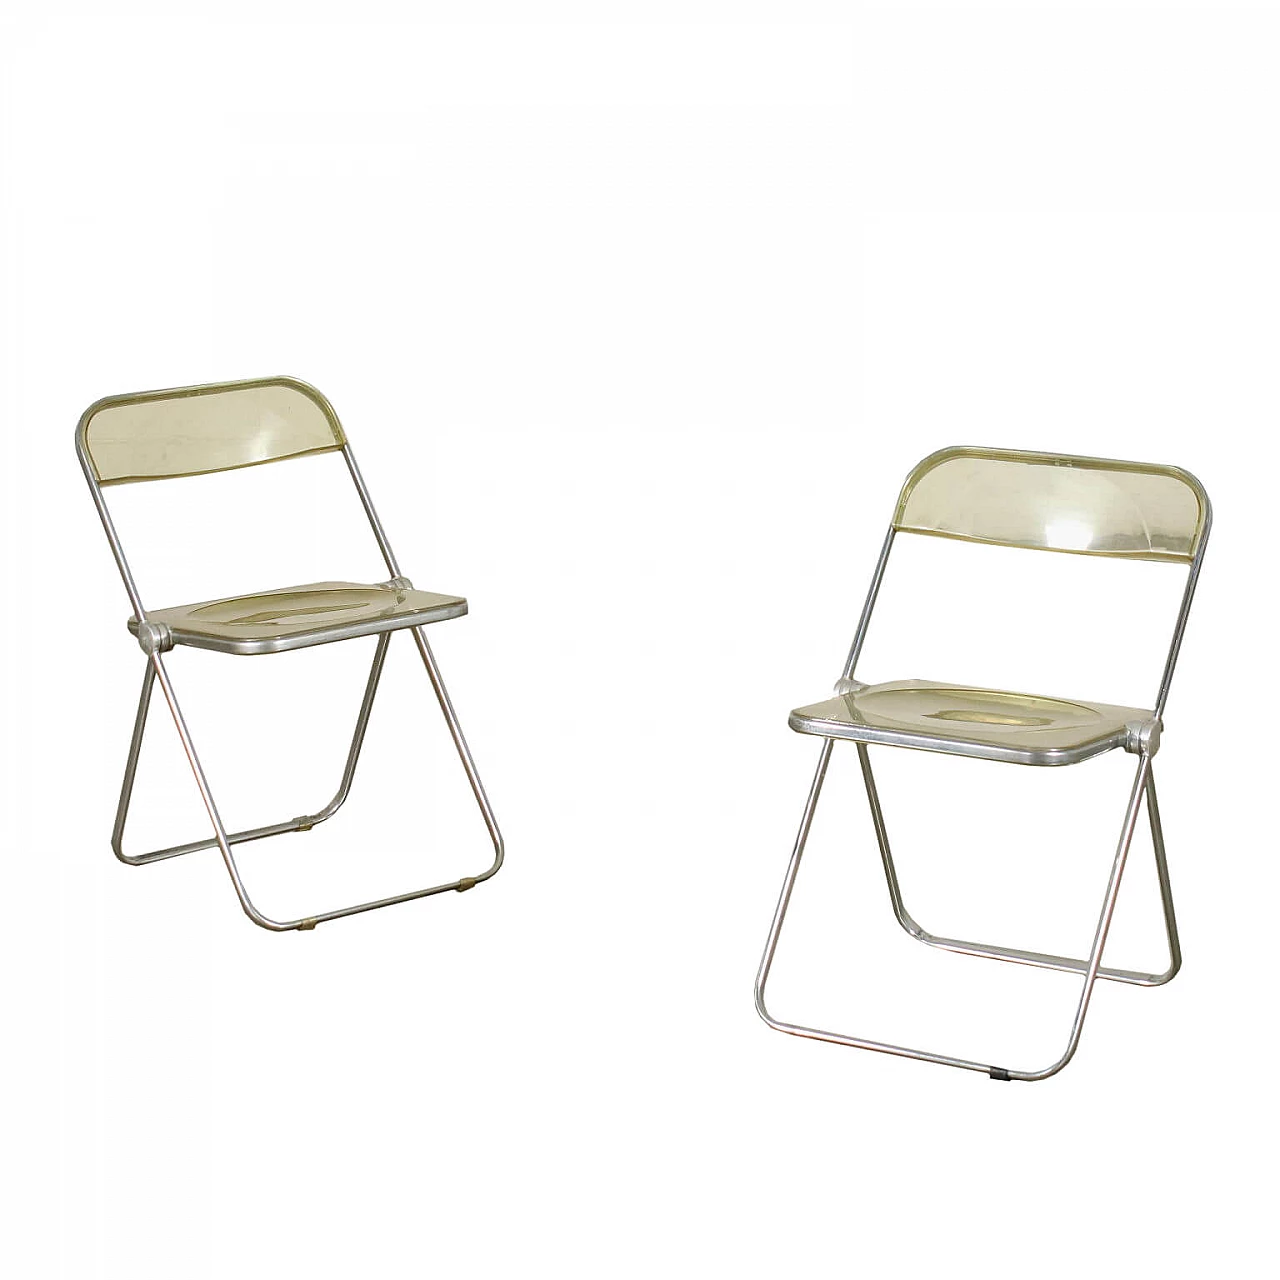 Pair of Plia folding chairs in metal and plastic material by Giancarlo Piretti for Anonima Castelli, 70s 1239001